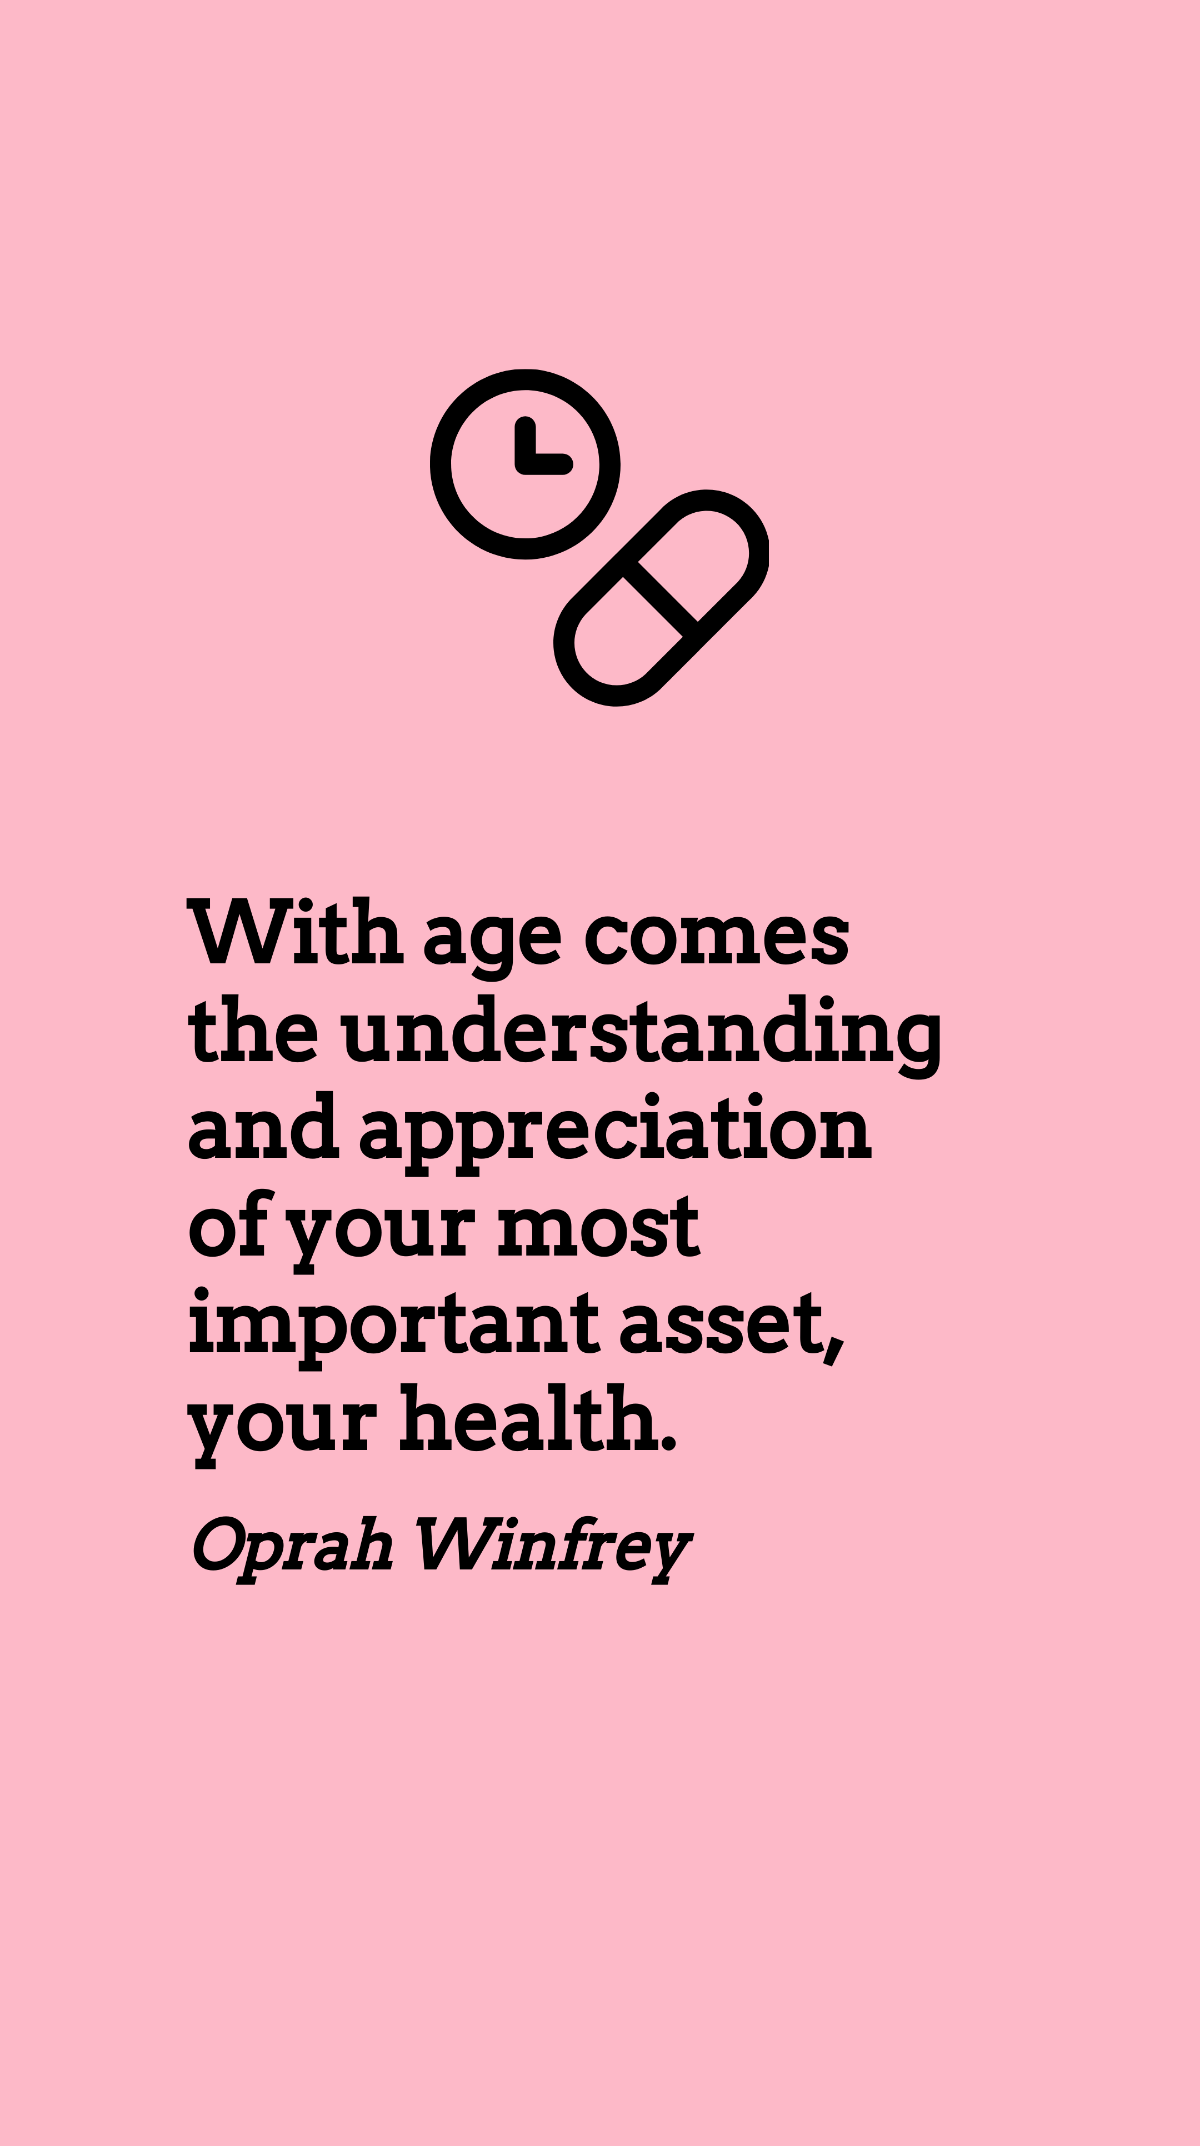 Free Oprah Winfrey - With age comes the understanding and appreciation of your most important asset, your health. Template